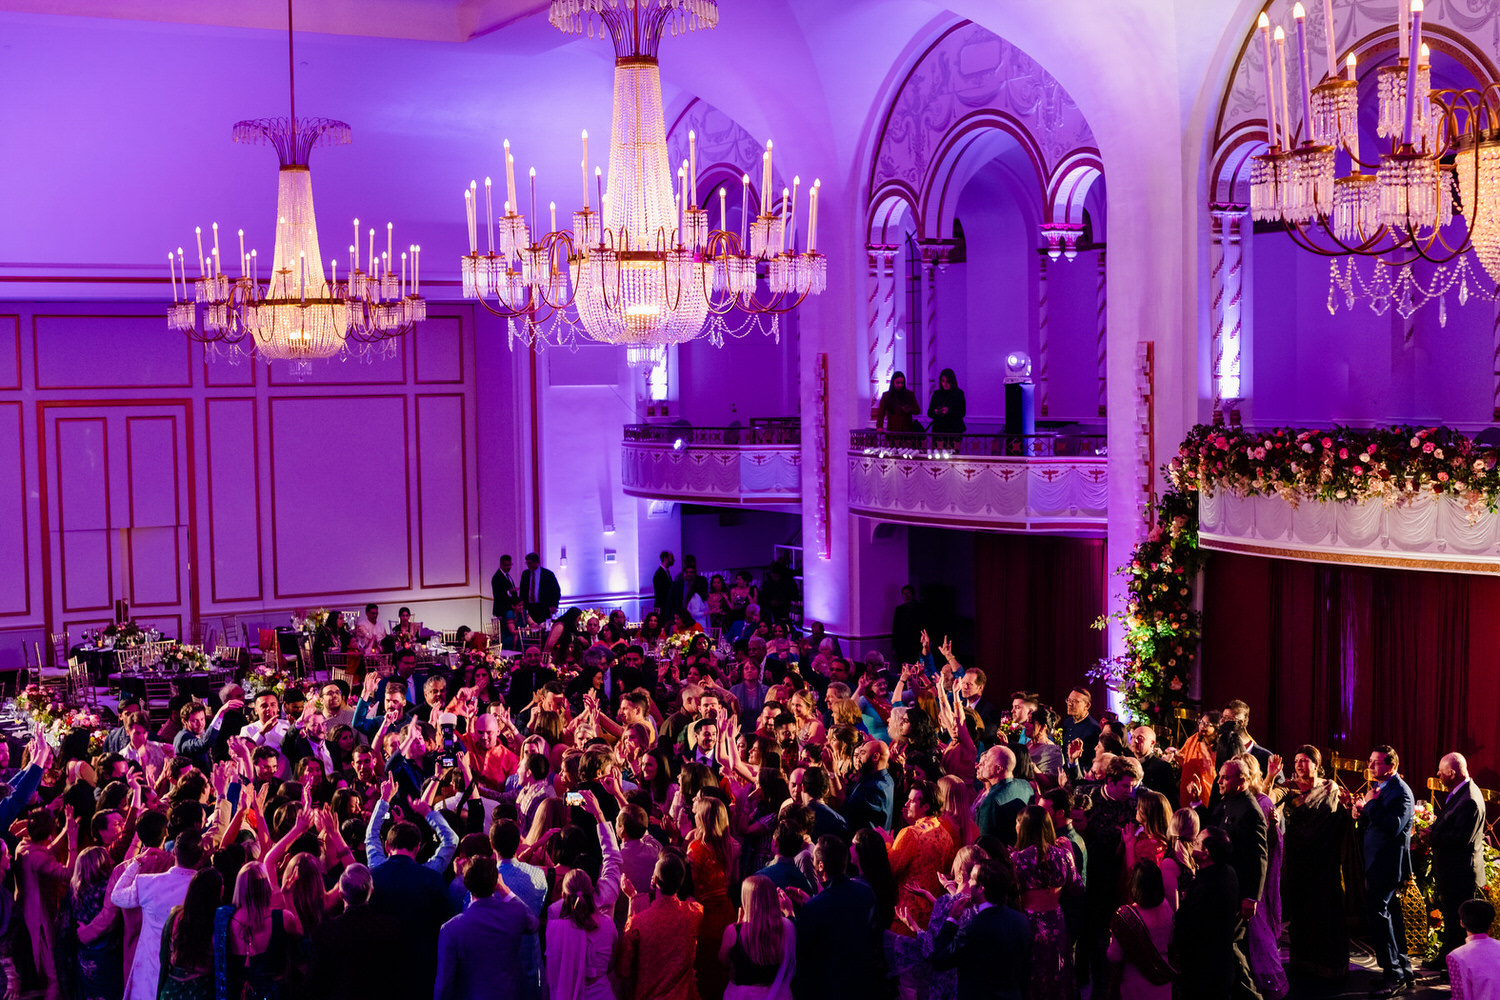 A large group of people in a room with chandeliers.